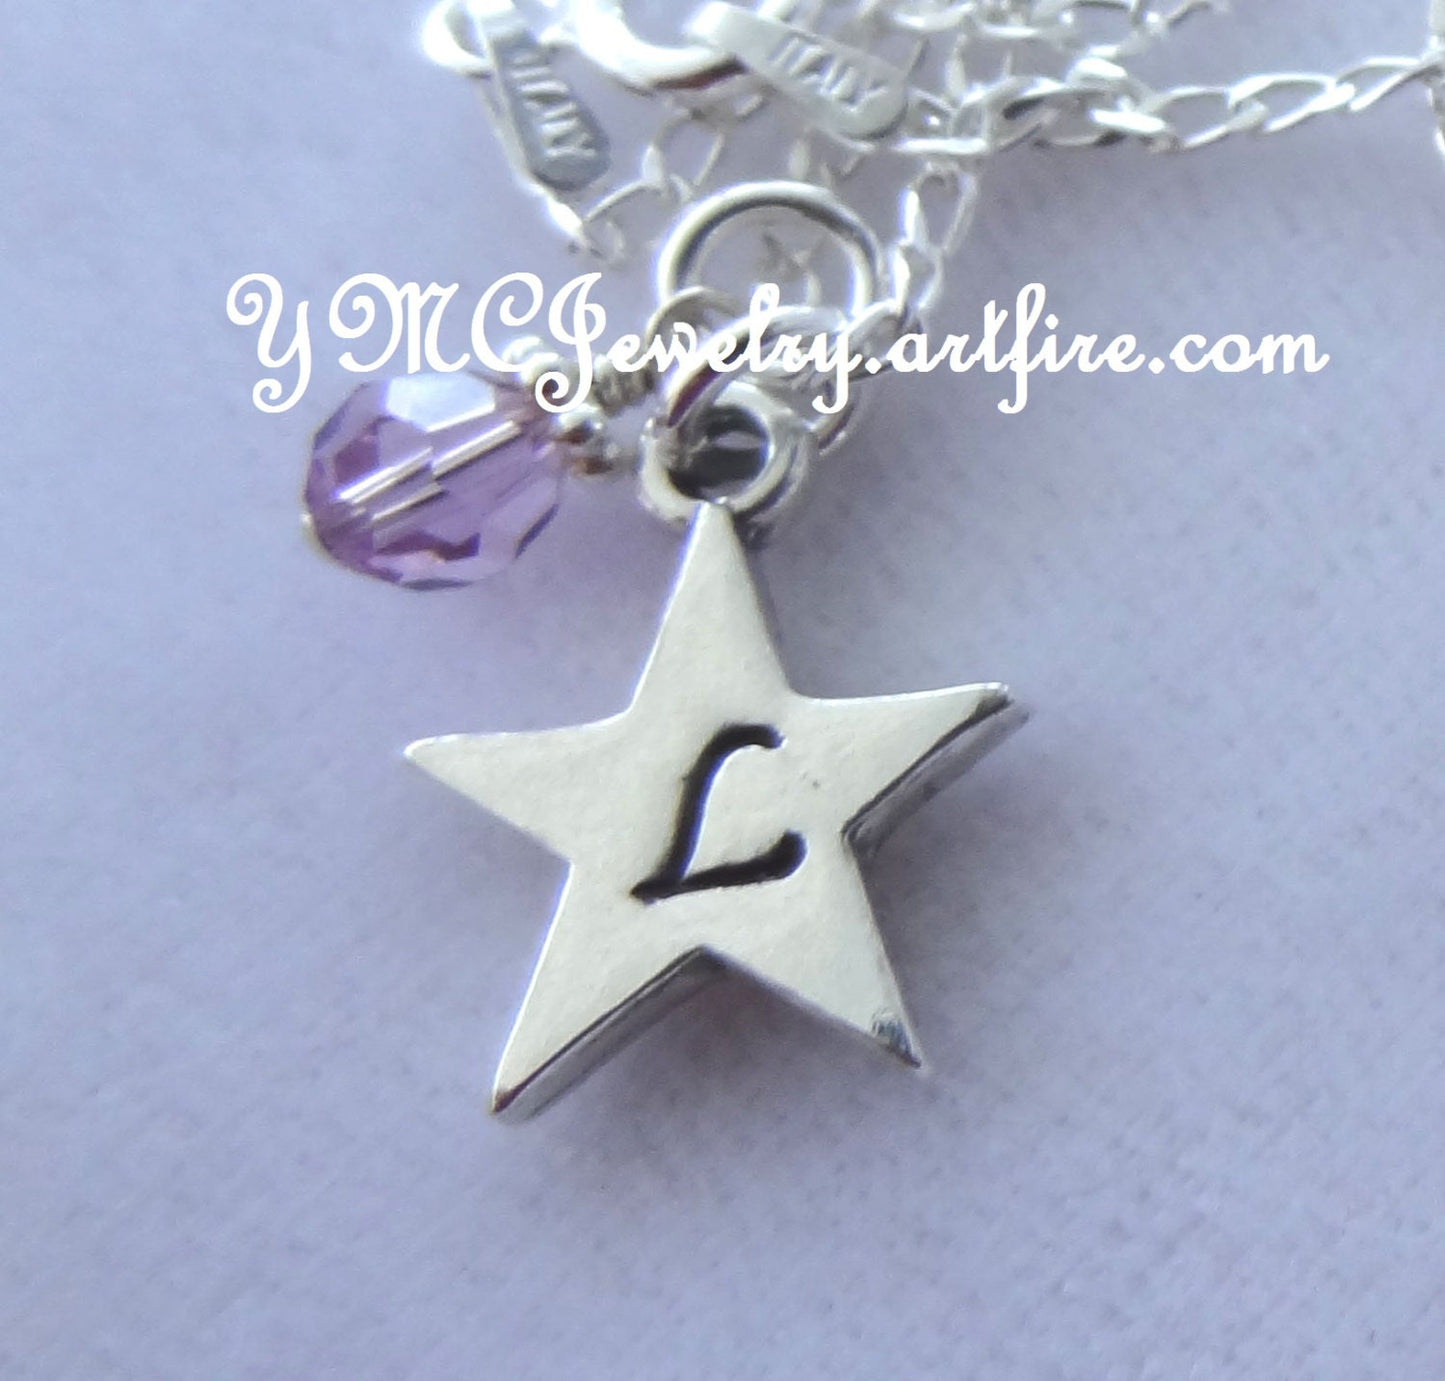 Sterling Silver Personalized Star Necklace, Birthstone Necklace, Initial Necklace, Personalized Bridesmaid Gift, New Mom Mother, Flower Girl